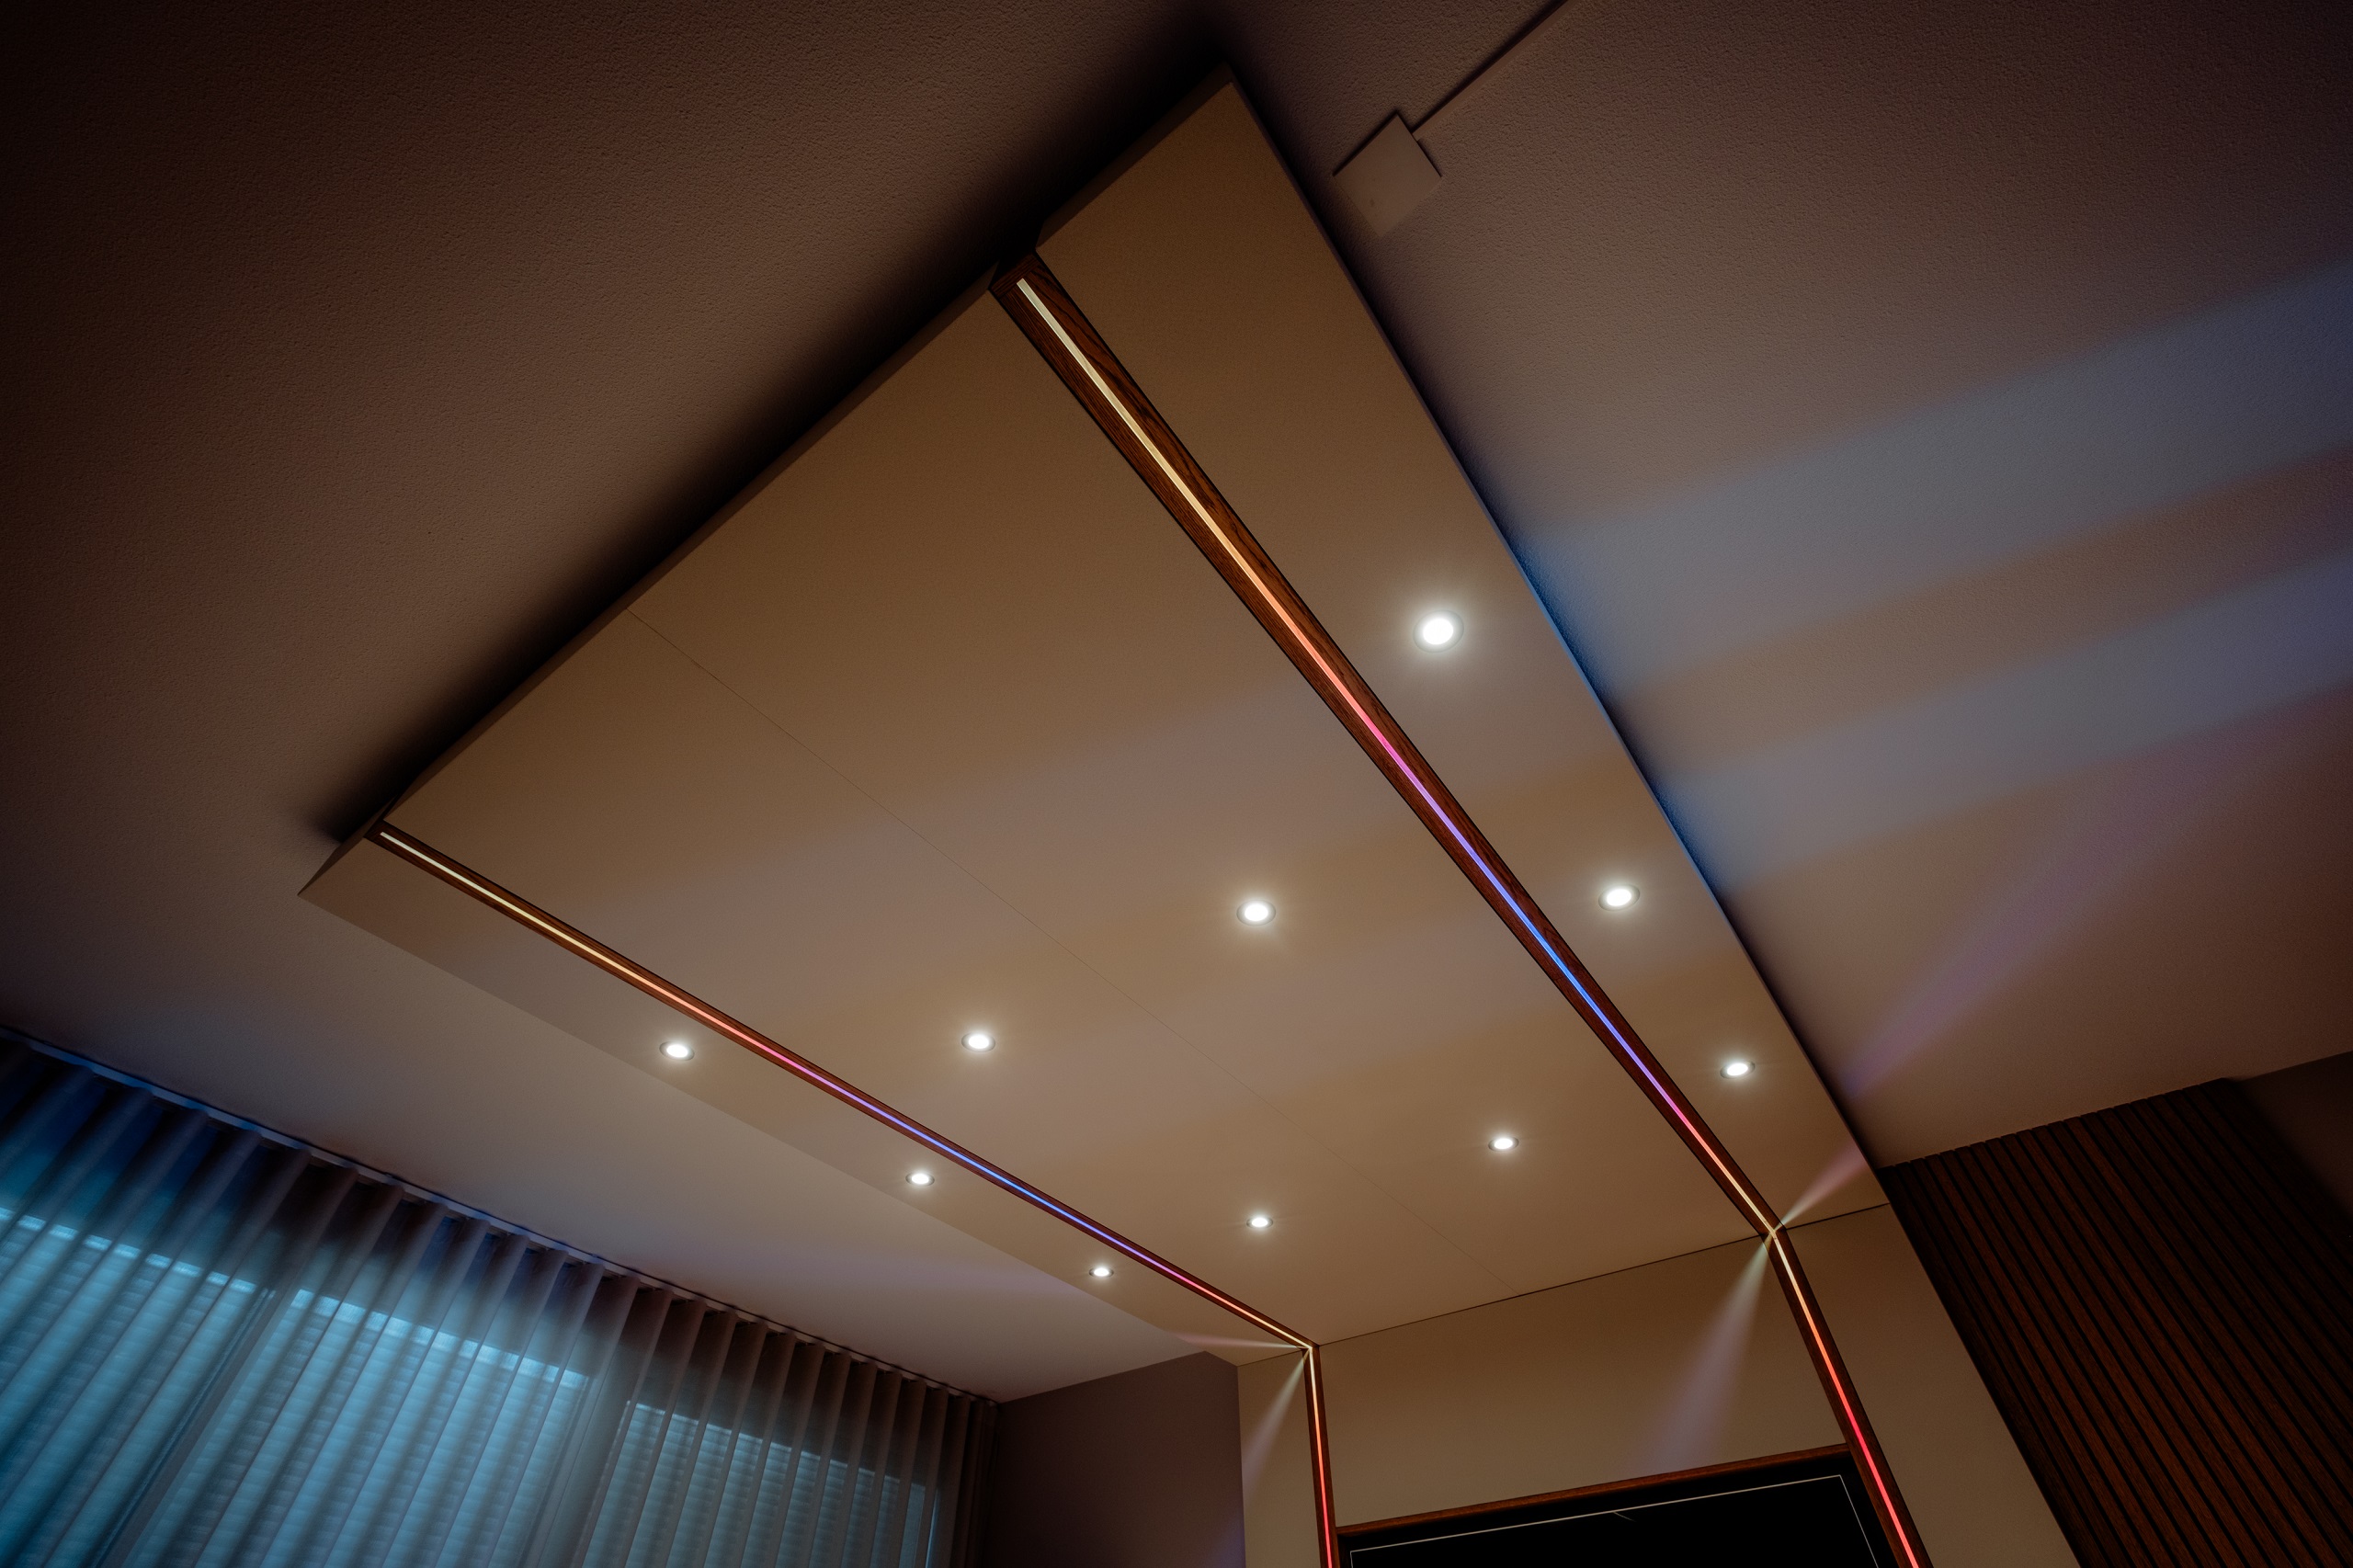 Custom Cinema in Hilversum - By Reference Sounds